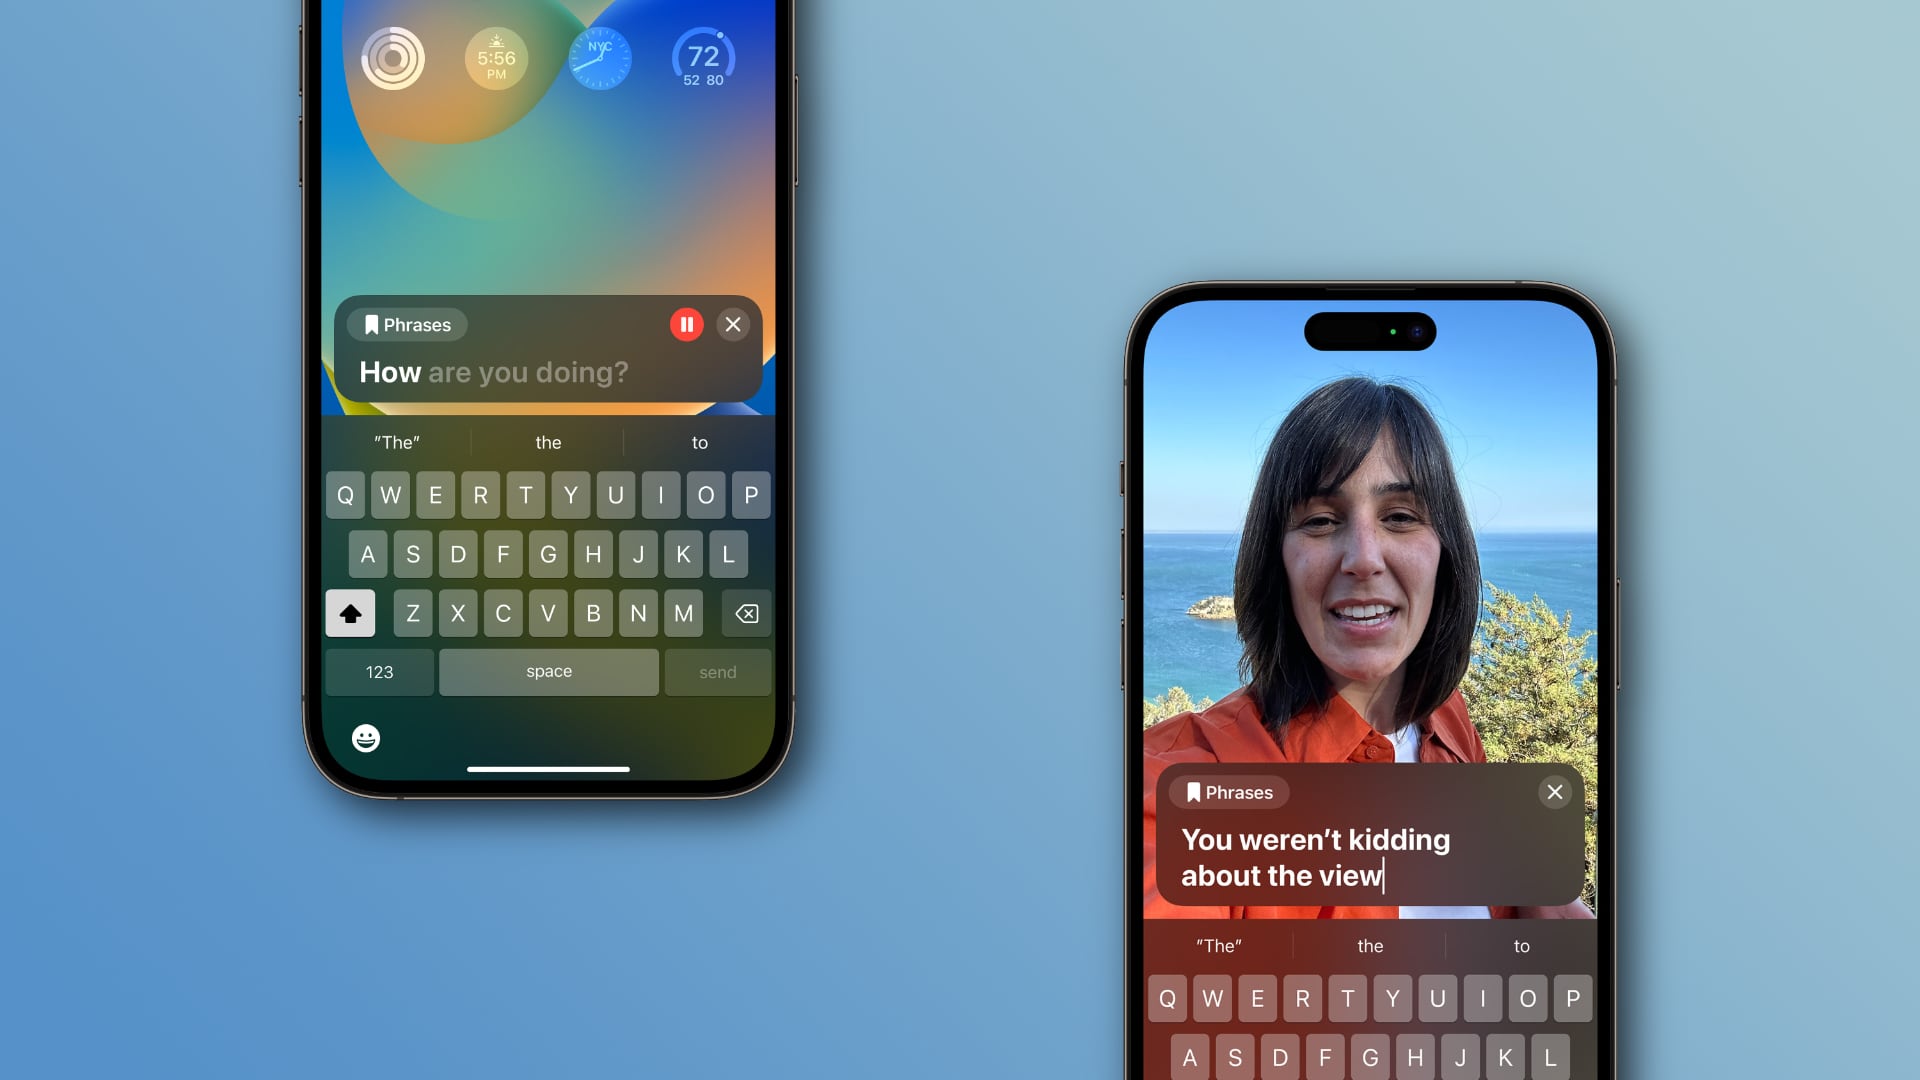 Guide: What is Personal Voice on iPhone, iPad and Mac? How does it work?